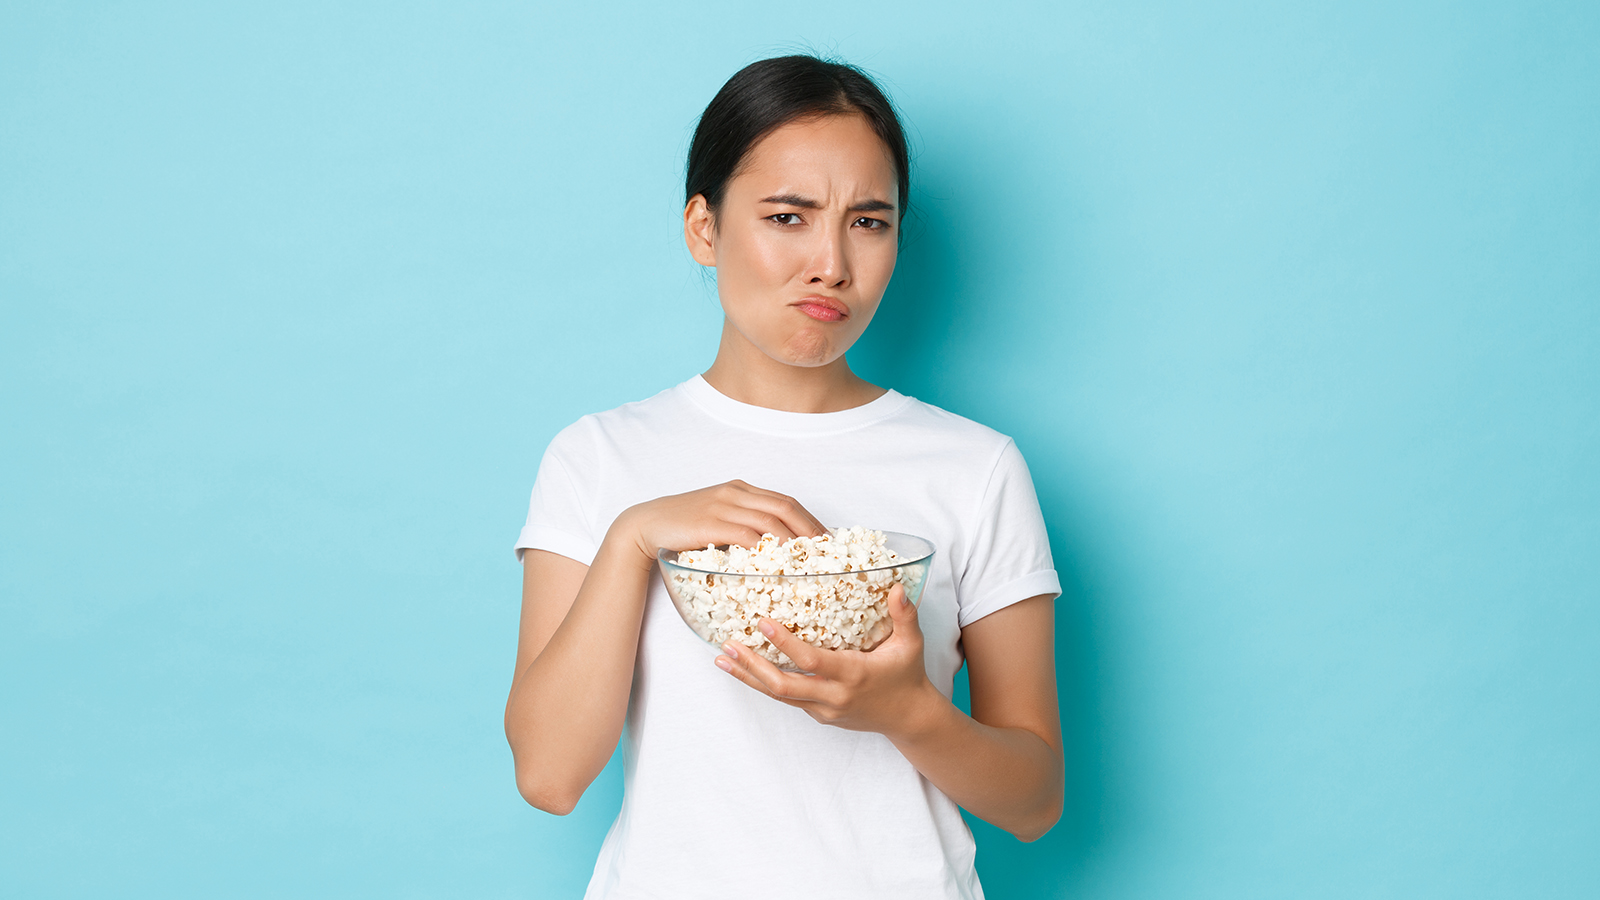 Lifestyle, leisure and emotions concept. Skeptical and displeased asian cute girl watching movie and eating popcorn, grimacing from cringe content, looking suspicious, standing light blue background